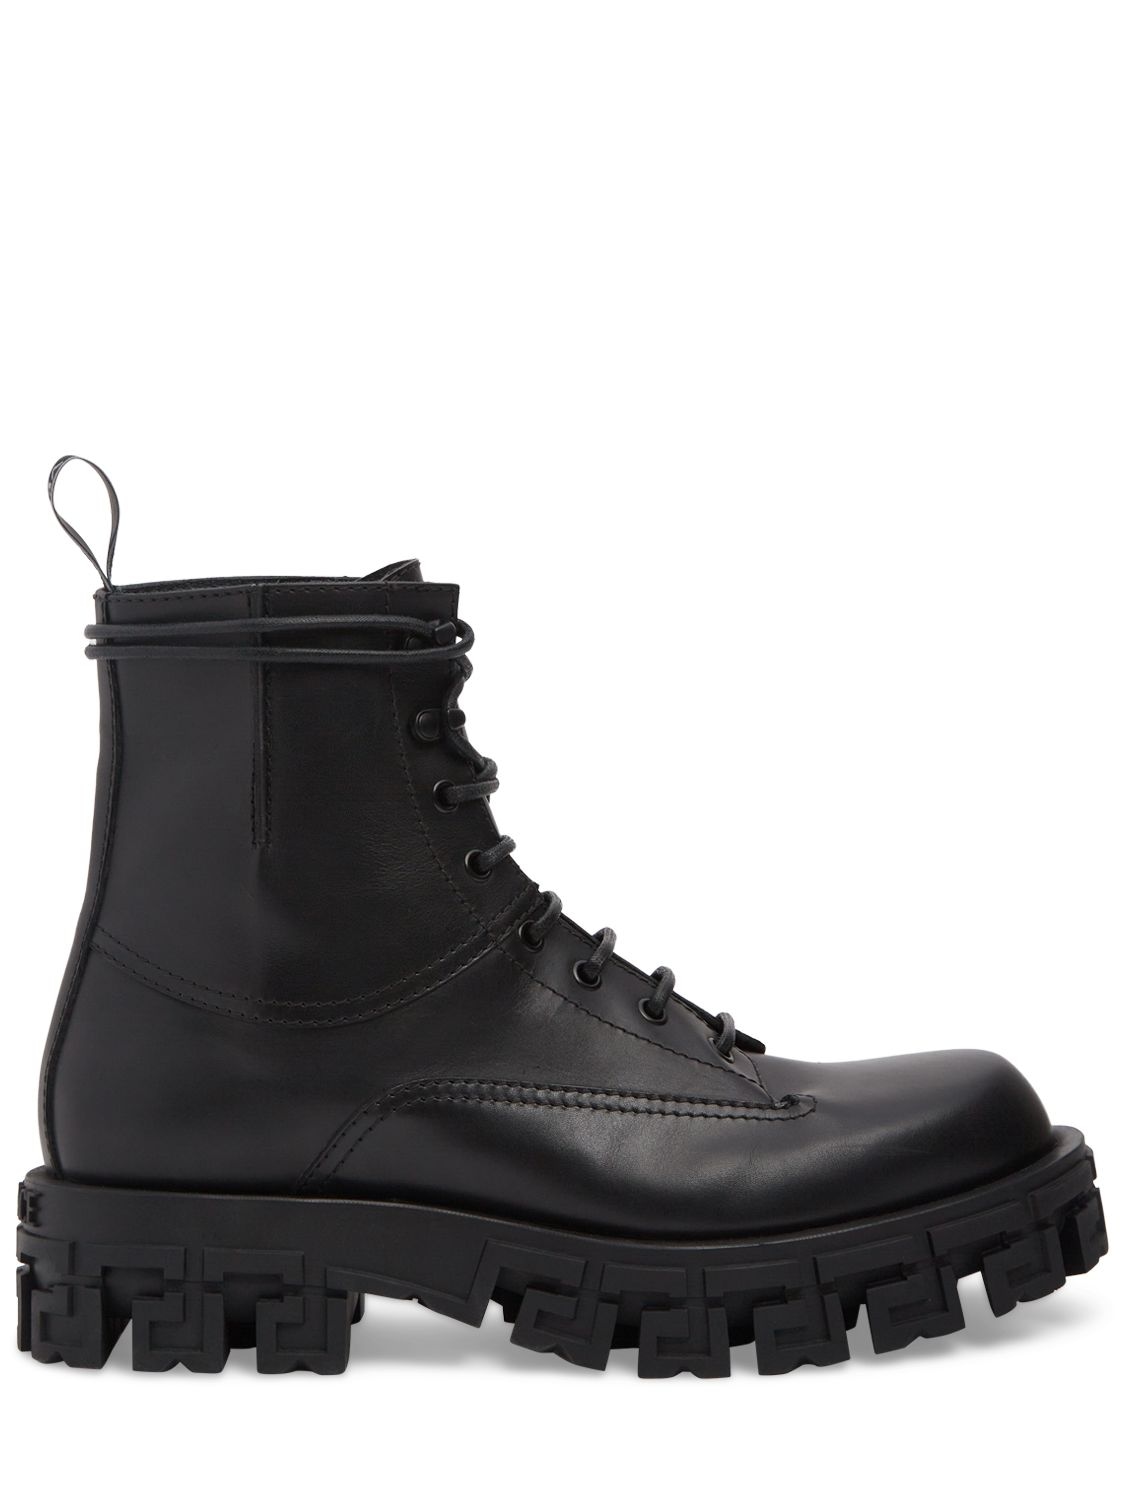 Image of Leather Combat Boots